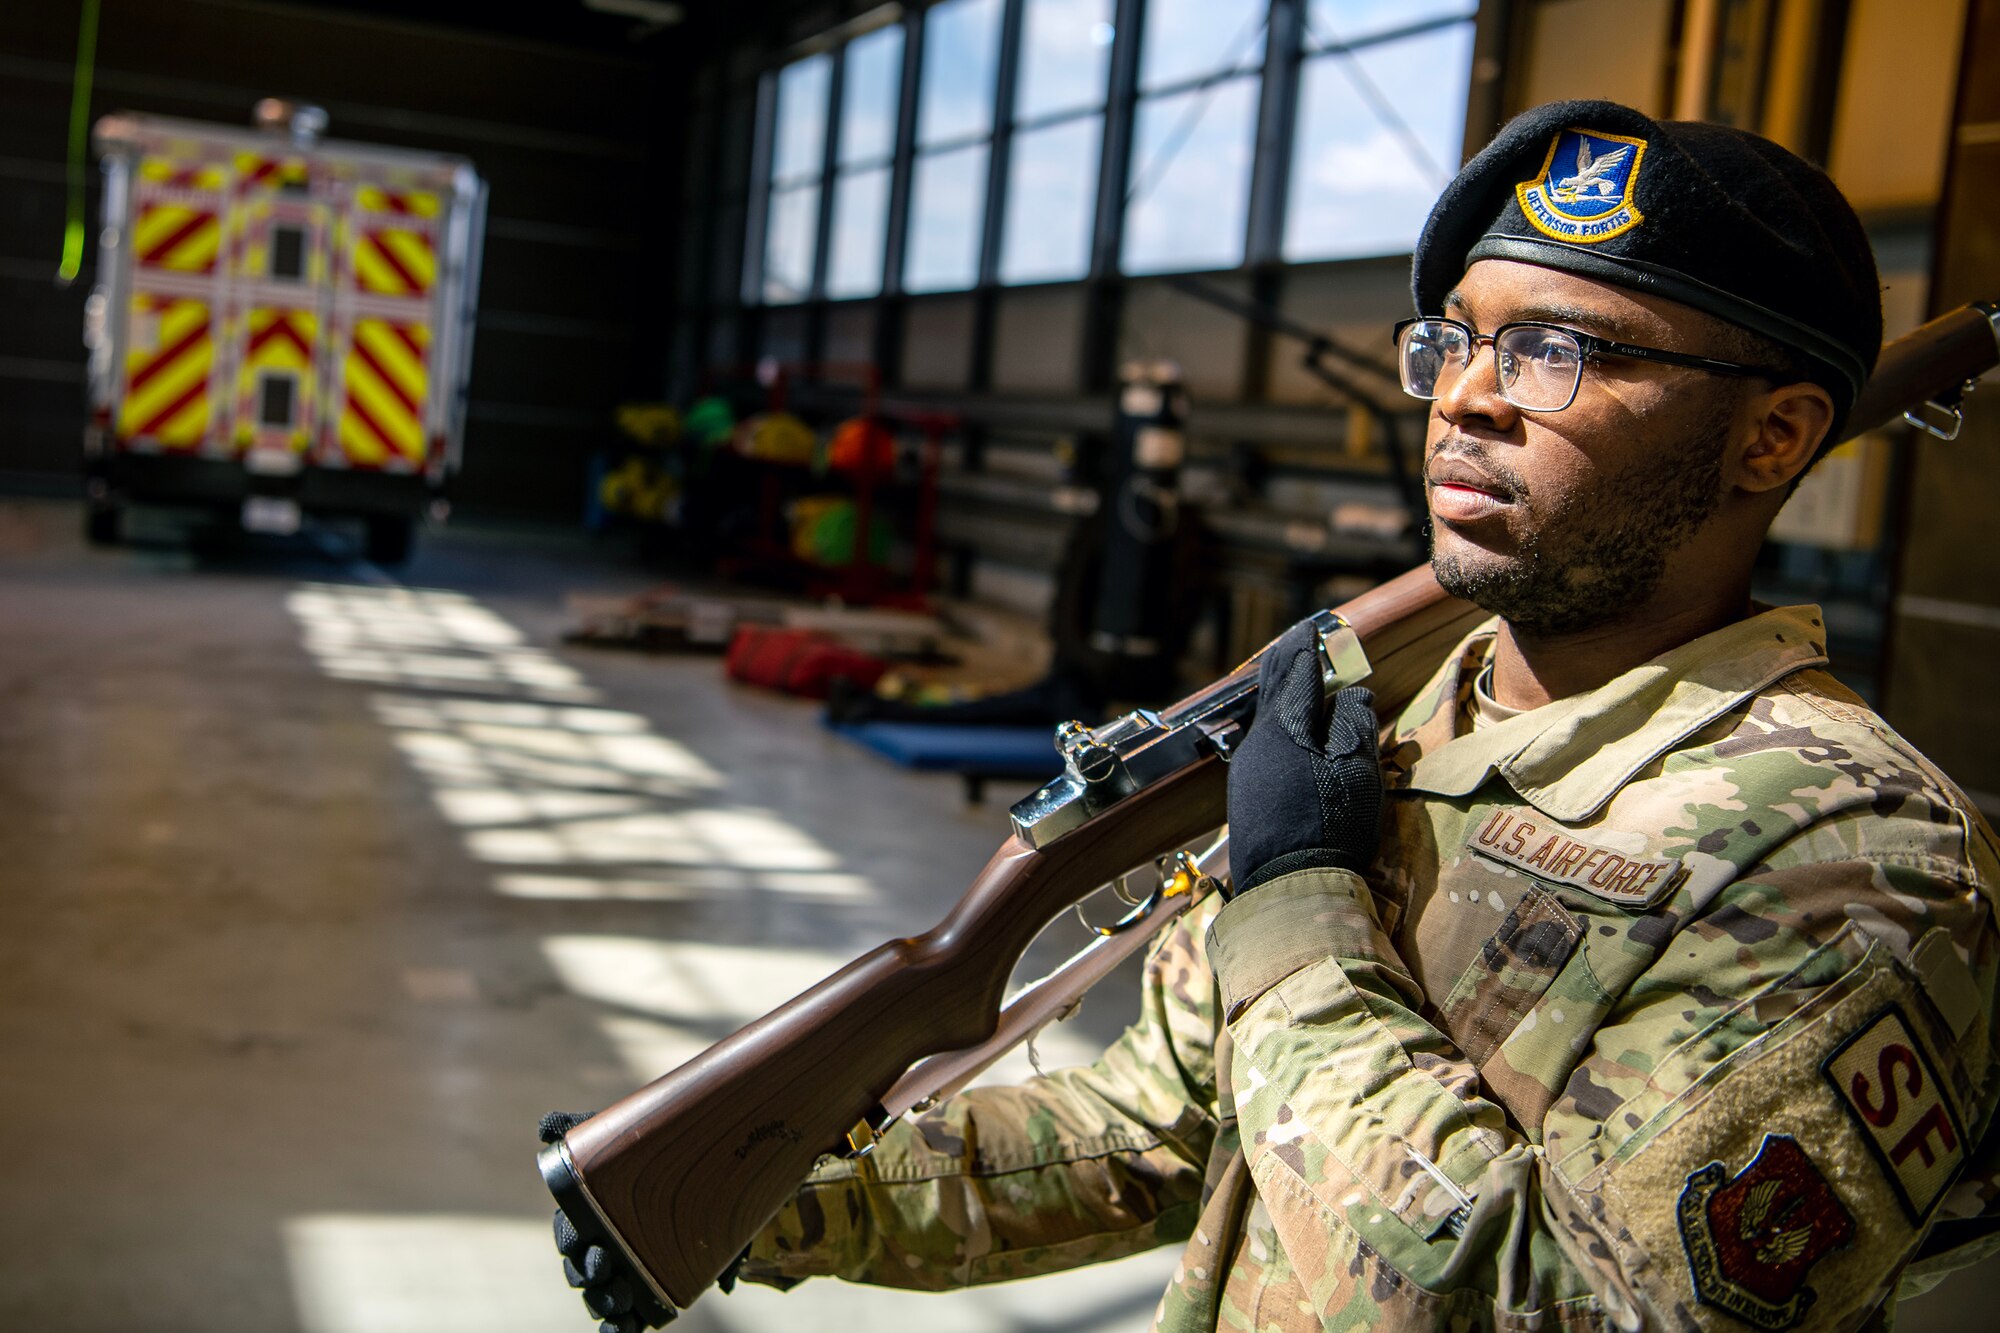 U.S. Air Force Airman 1st Class Michael Jordan, 423d Air Base Group Honor Guard team member, practices rifle maneuvers at RAF Alconbury, England, April 21, 2023. In order to become HG members, Airmen must complete rigorous initial training to ensure they are qualified to render military honors. (U.S. Air Force photo by Staff Sgt. Eugene Oliver)